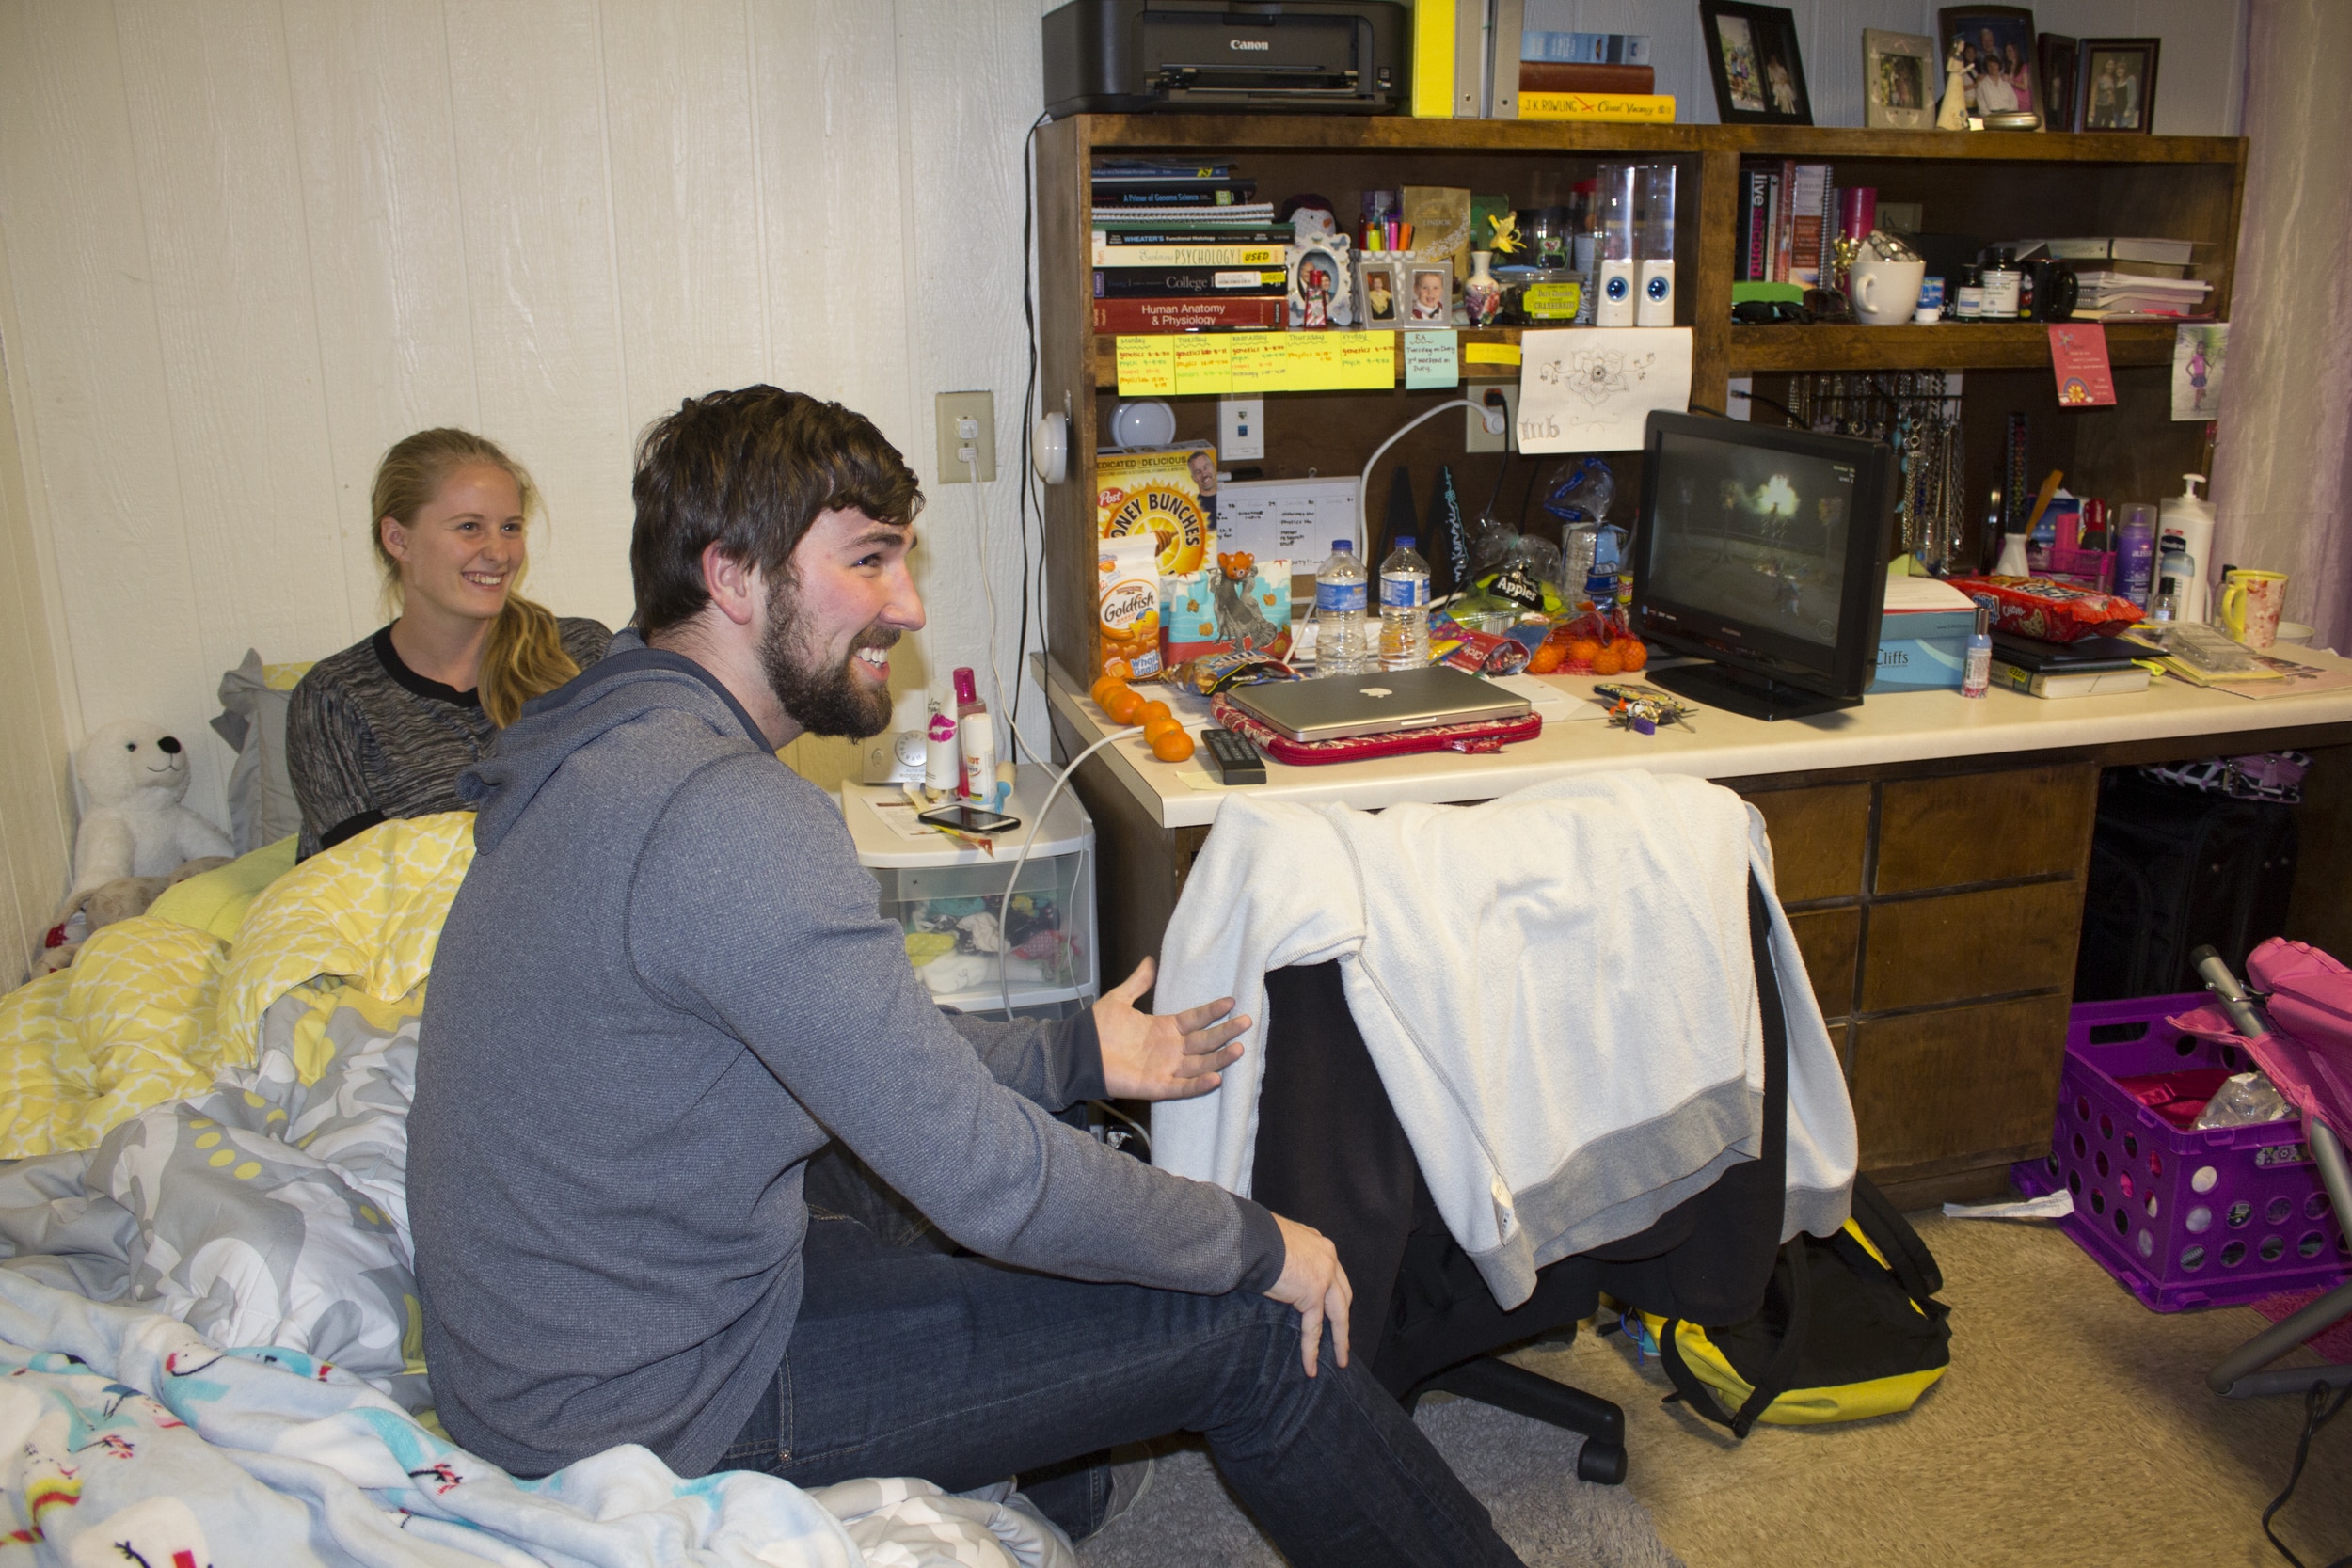  Garret King and McKenzie Botts settle down for a night of TV shows such as the Amazing Race. 